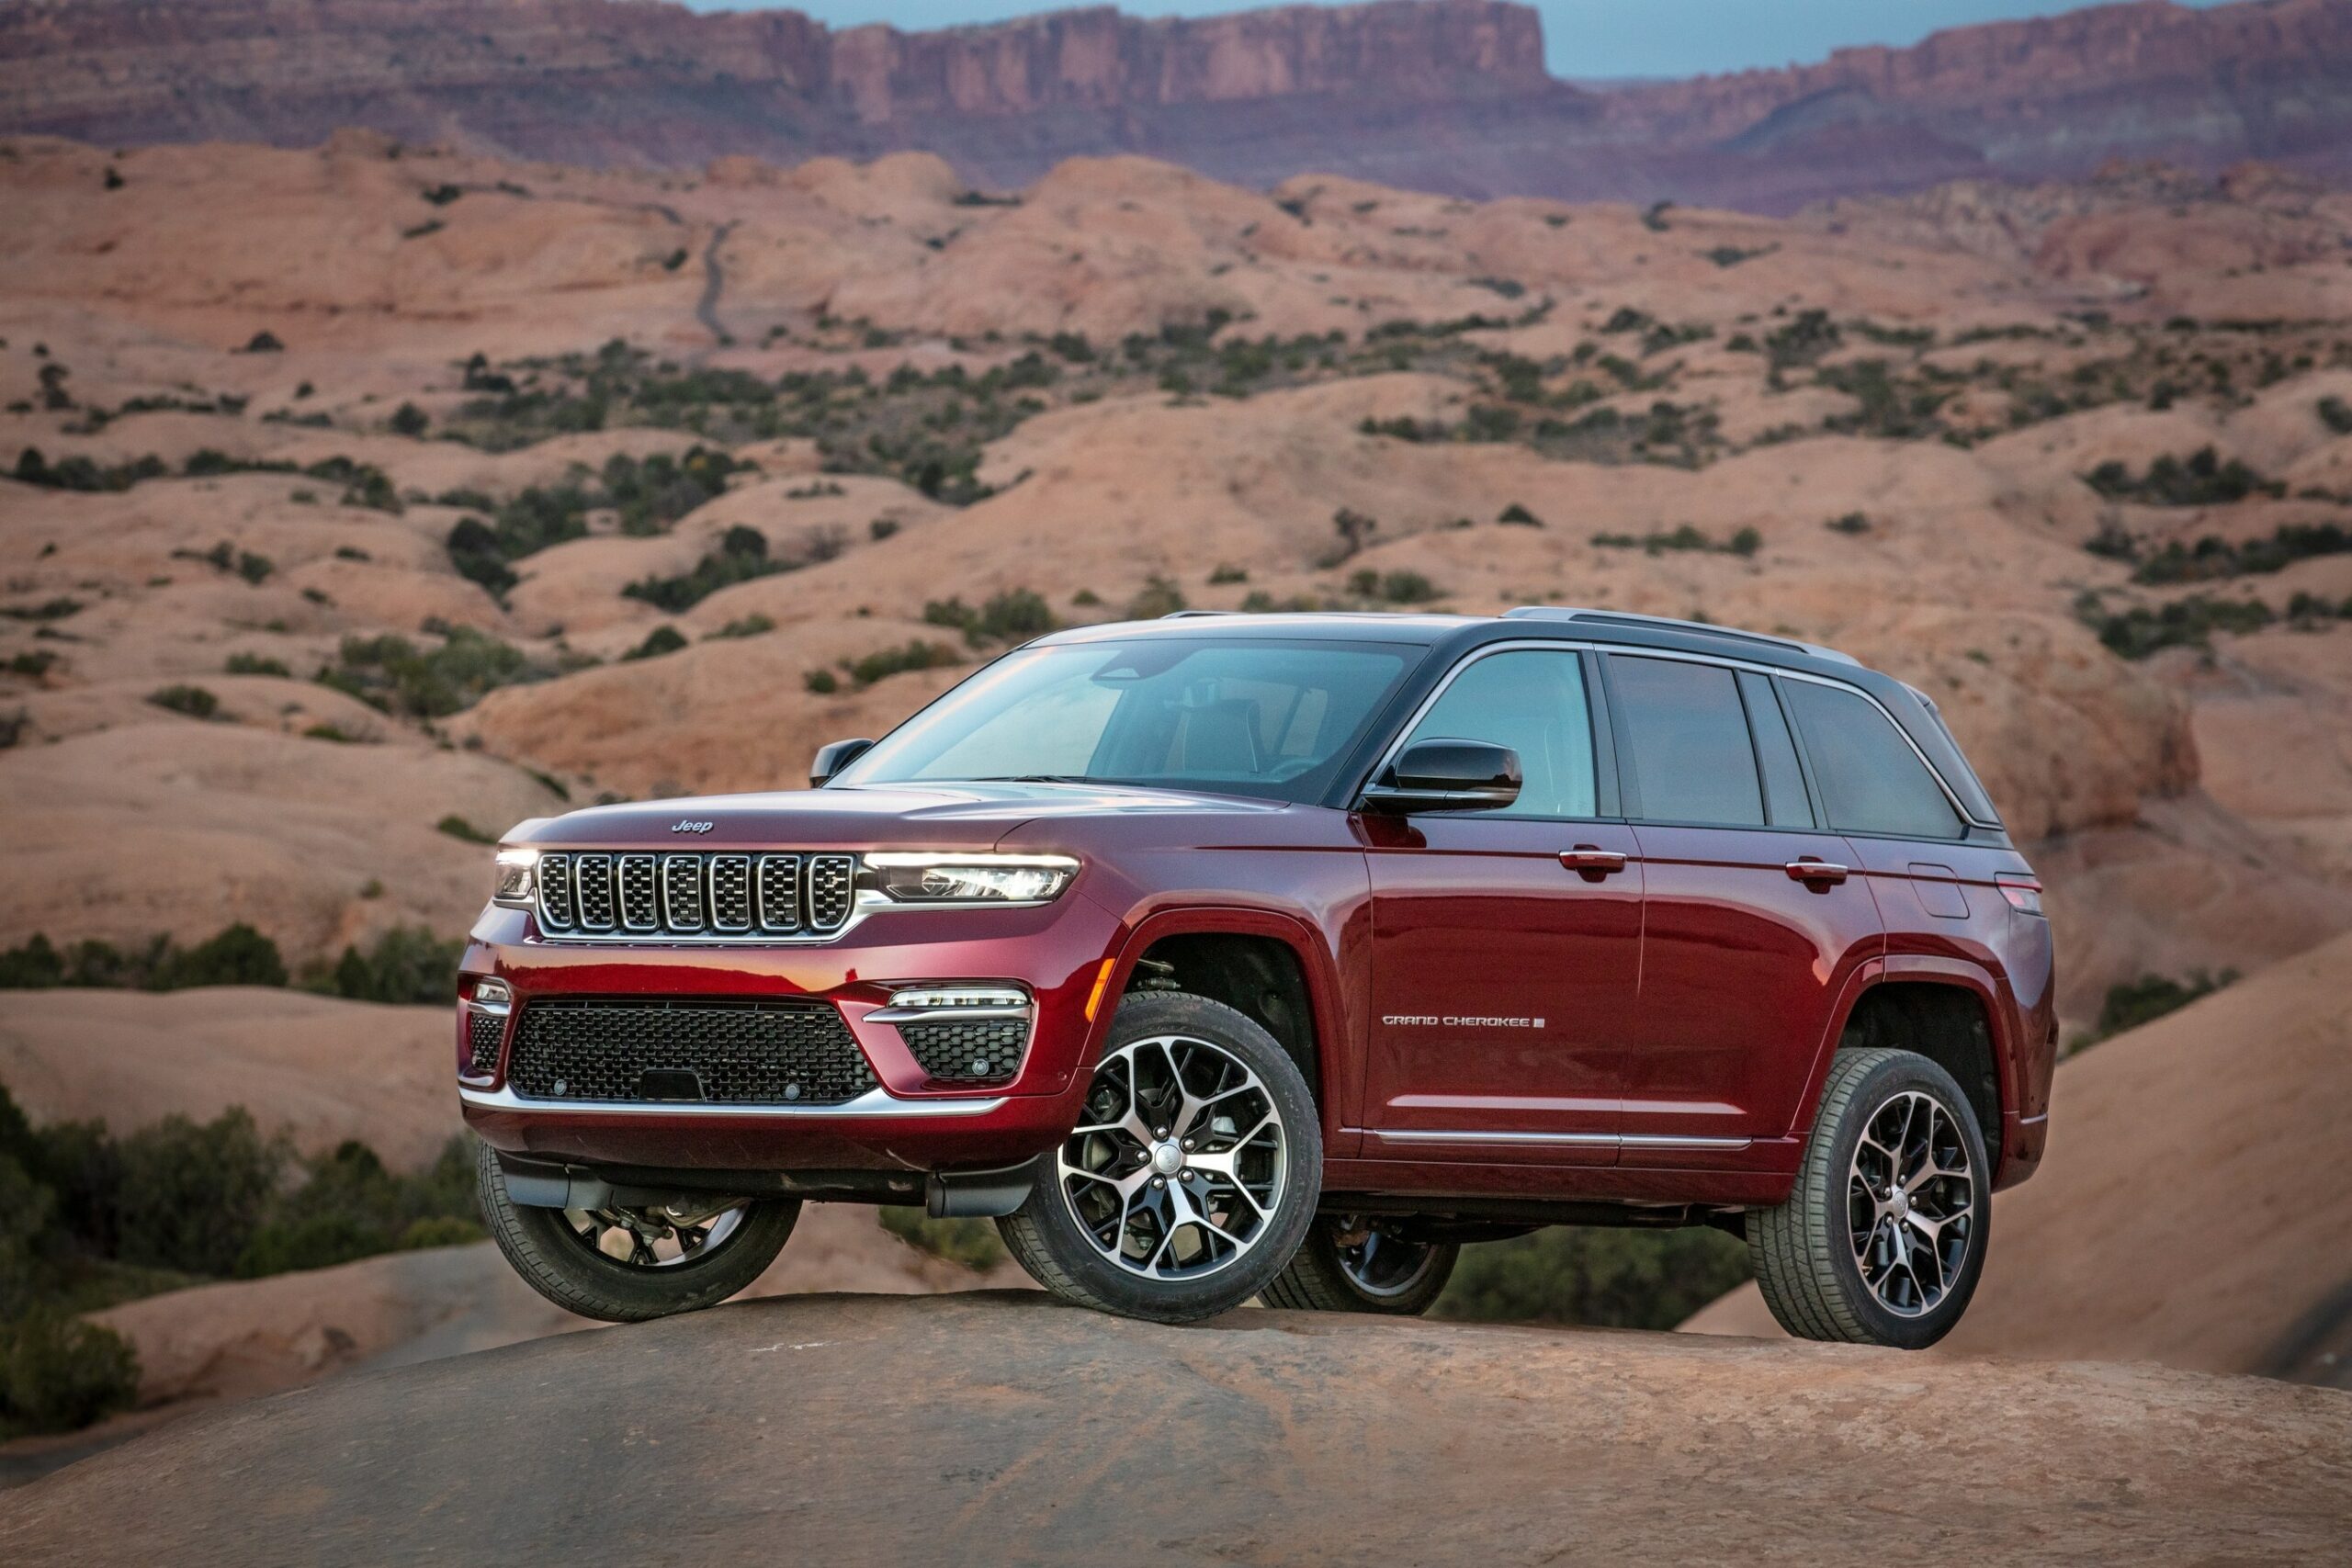 Jeep Receives Automotive Loyalty Award From S&P Global | THE SHOP